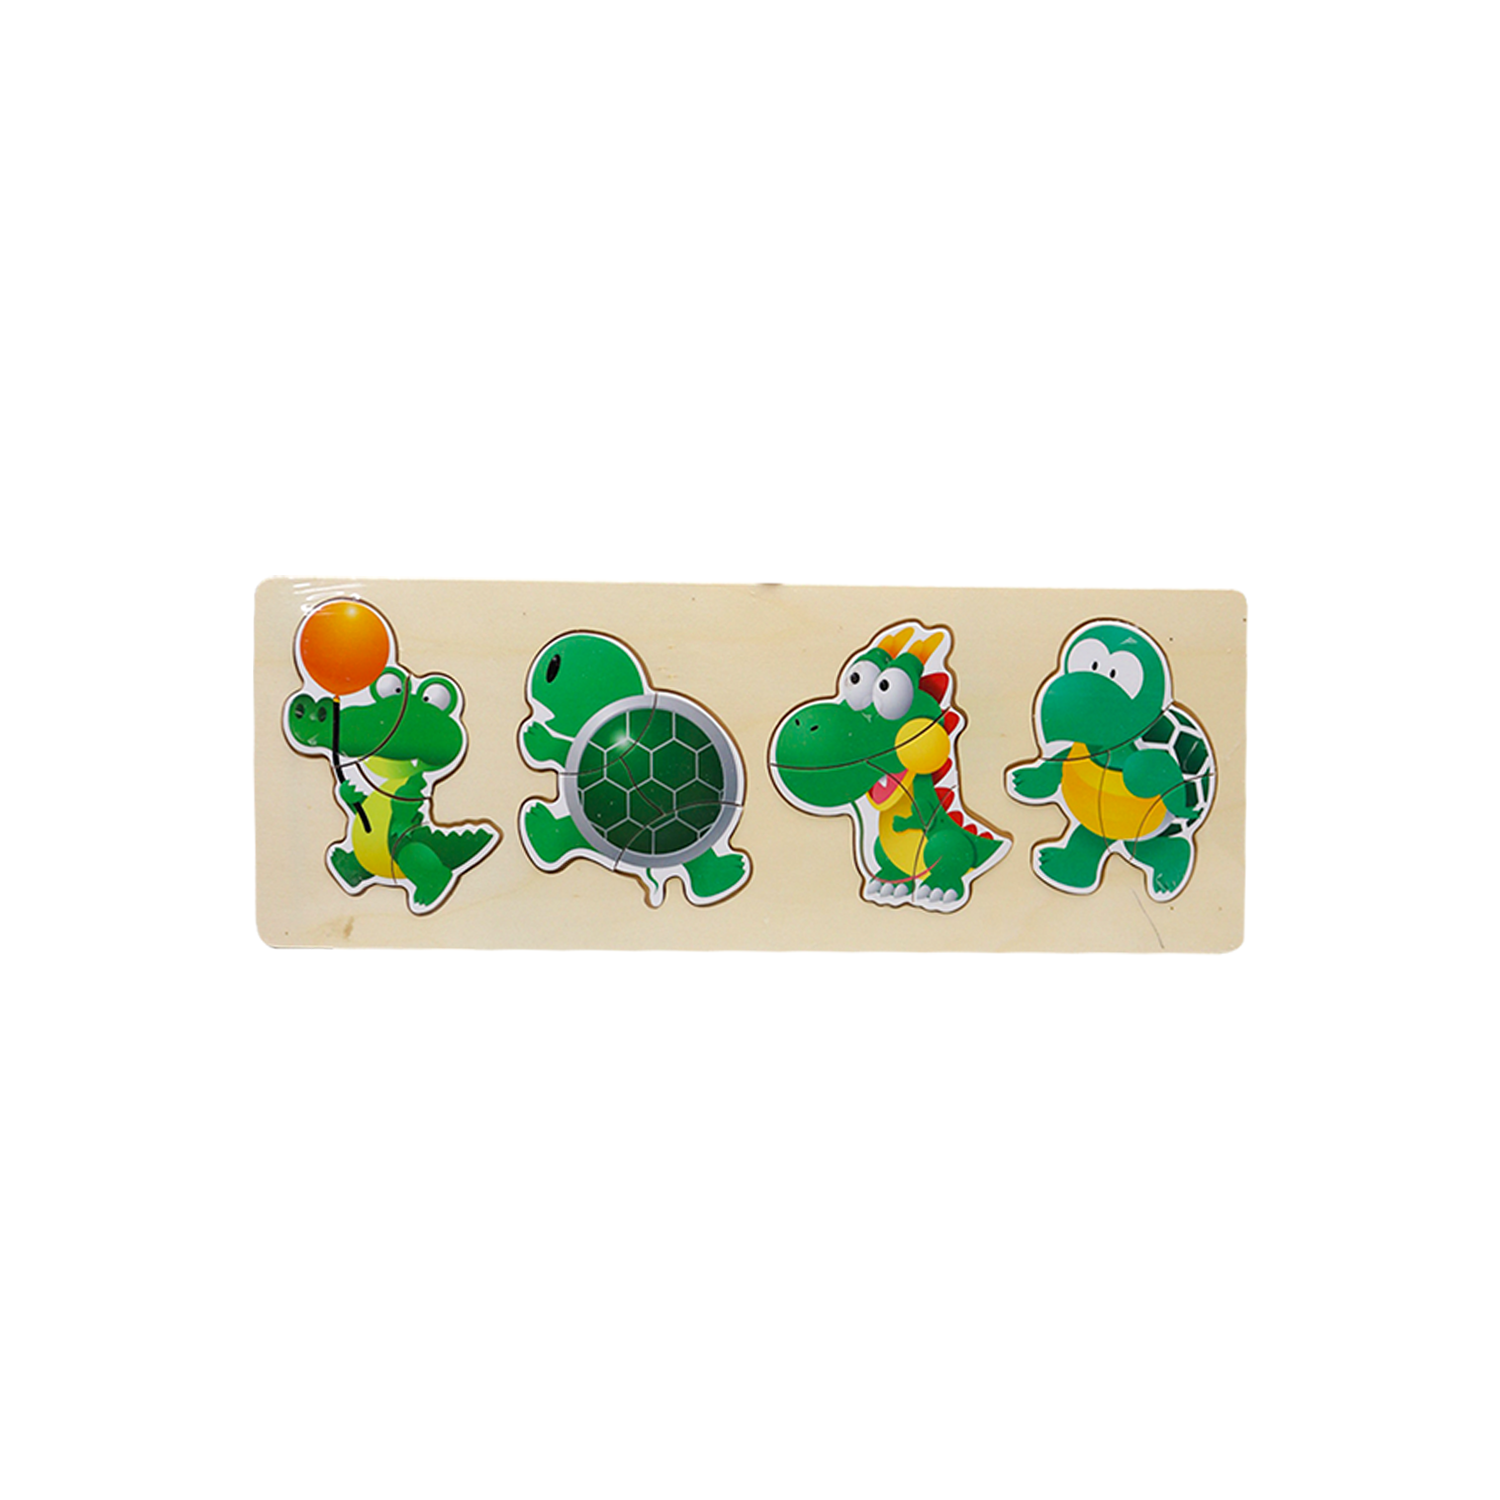 Lift and Match Educational Puzzle Toy for Kids